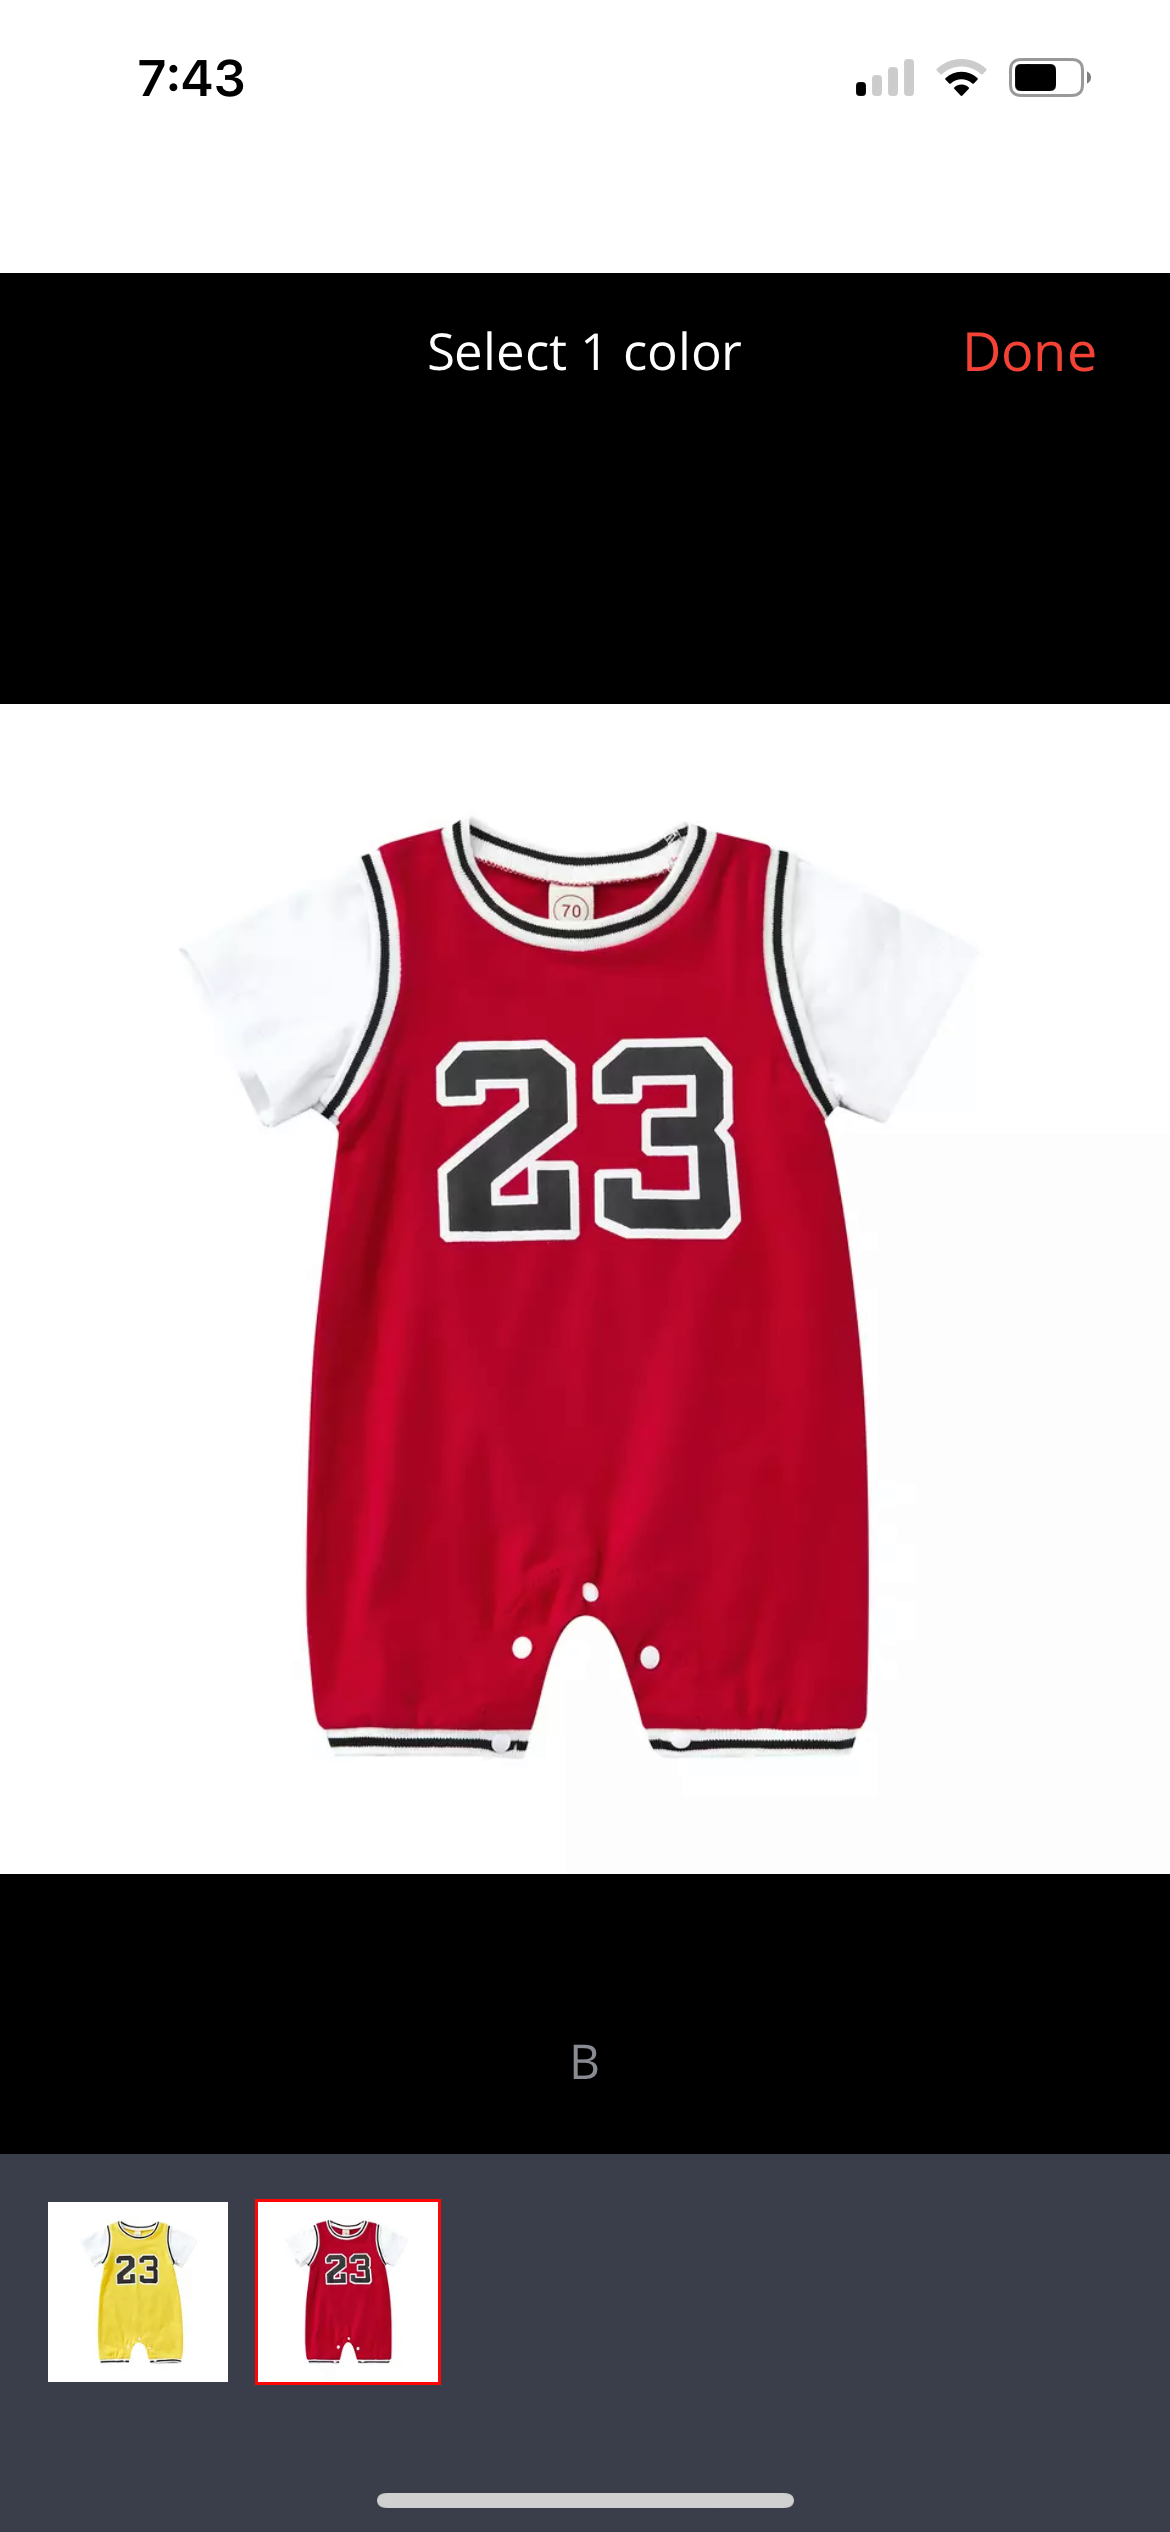 BASKETBALL JERSEY ROMPER - RED.